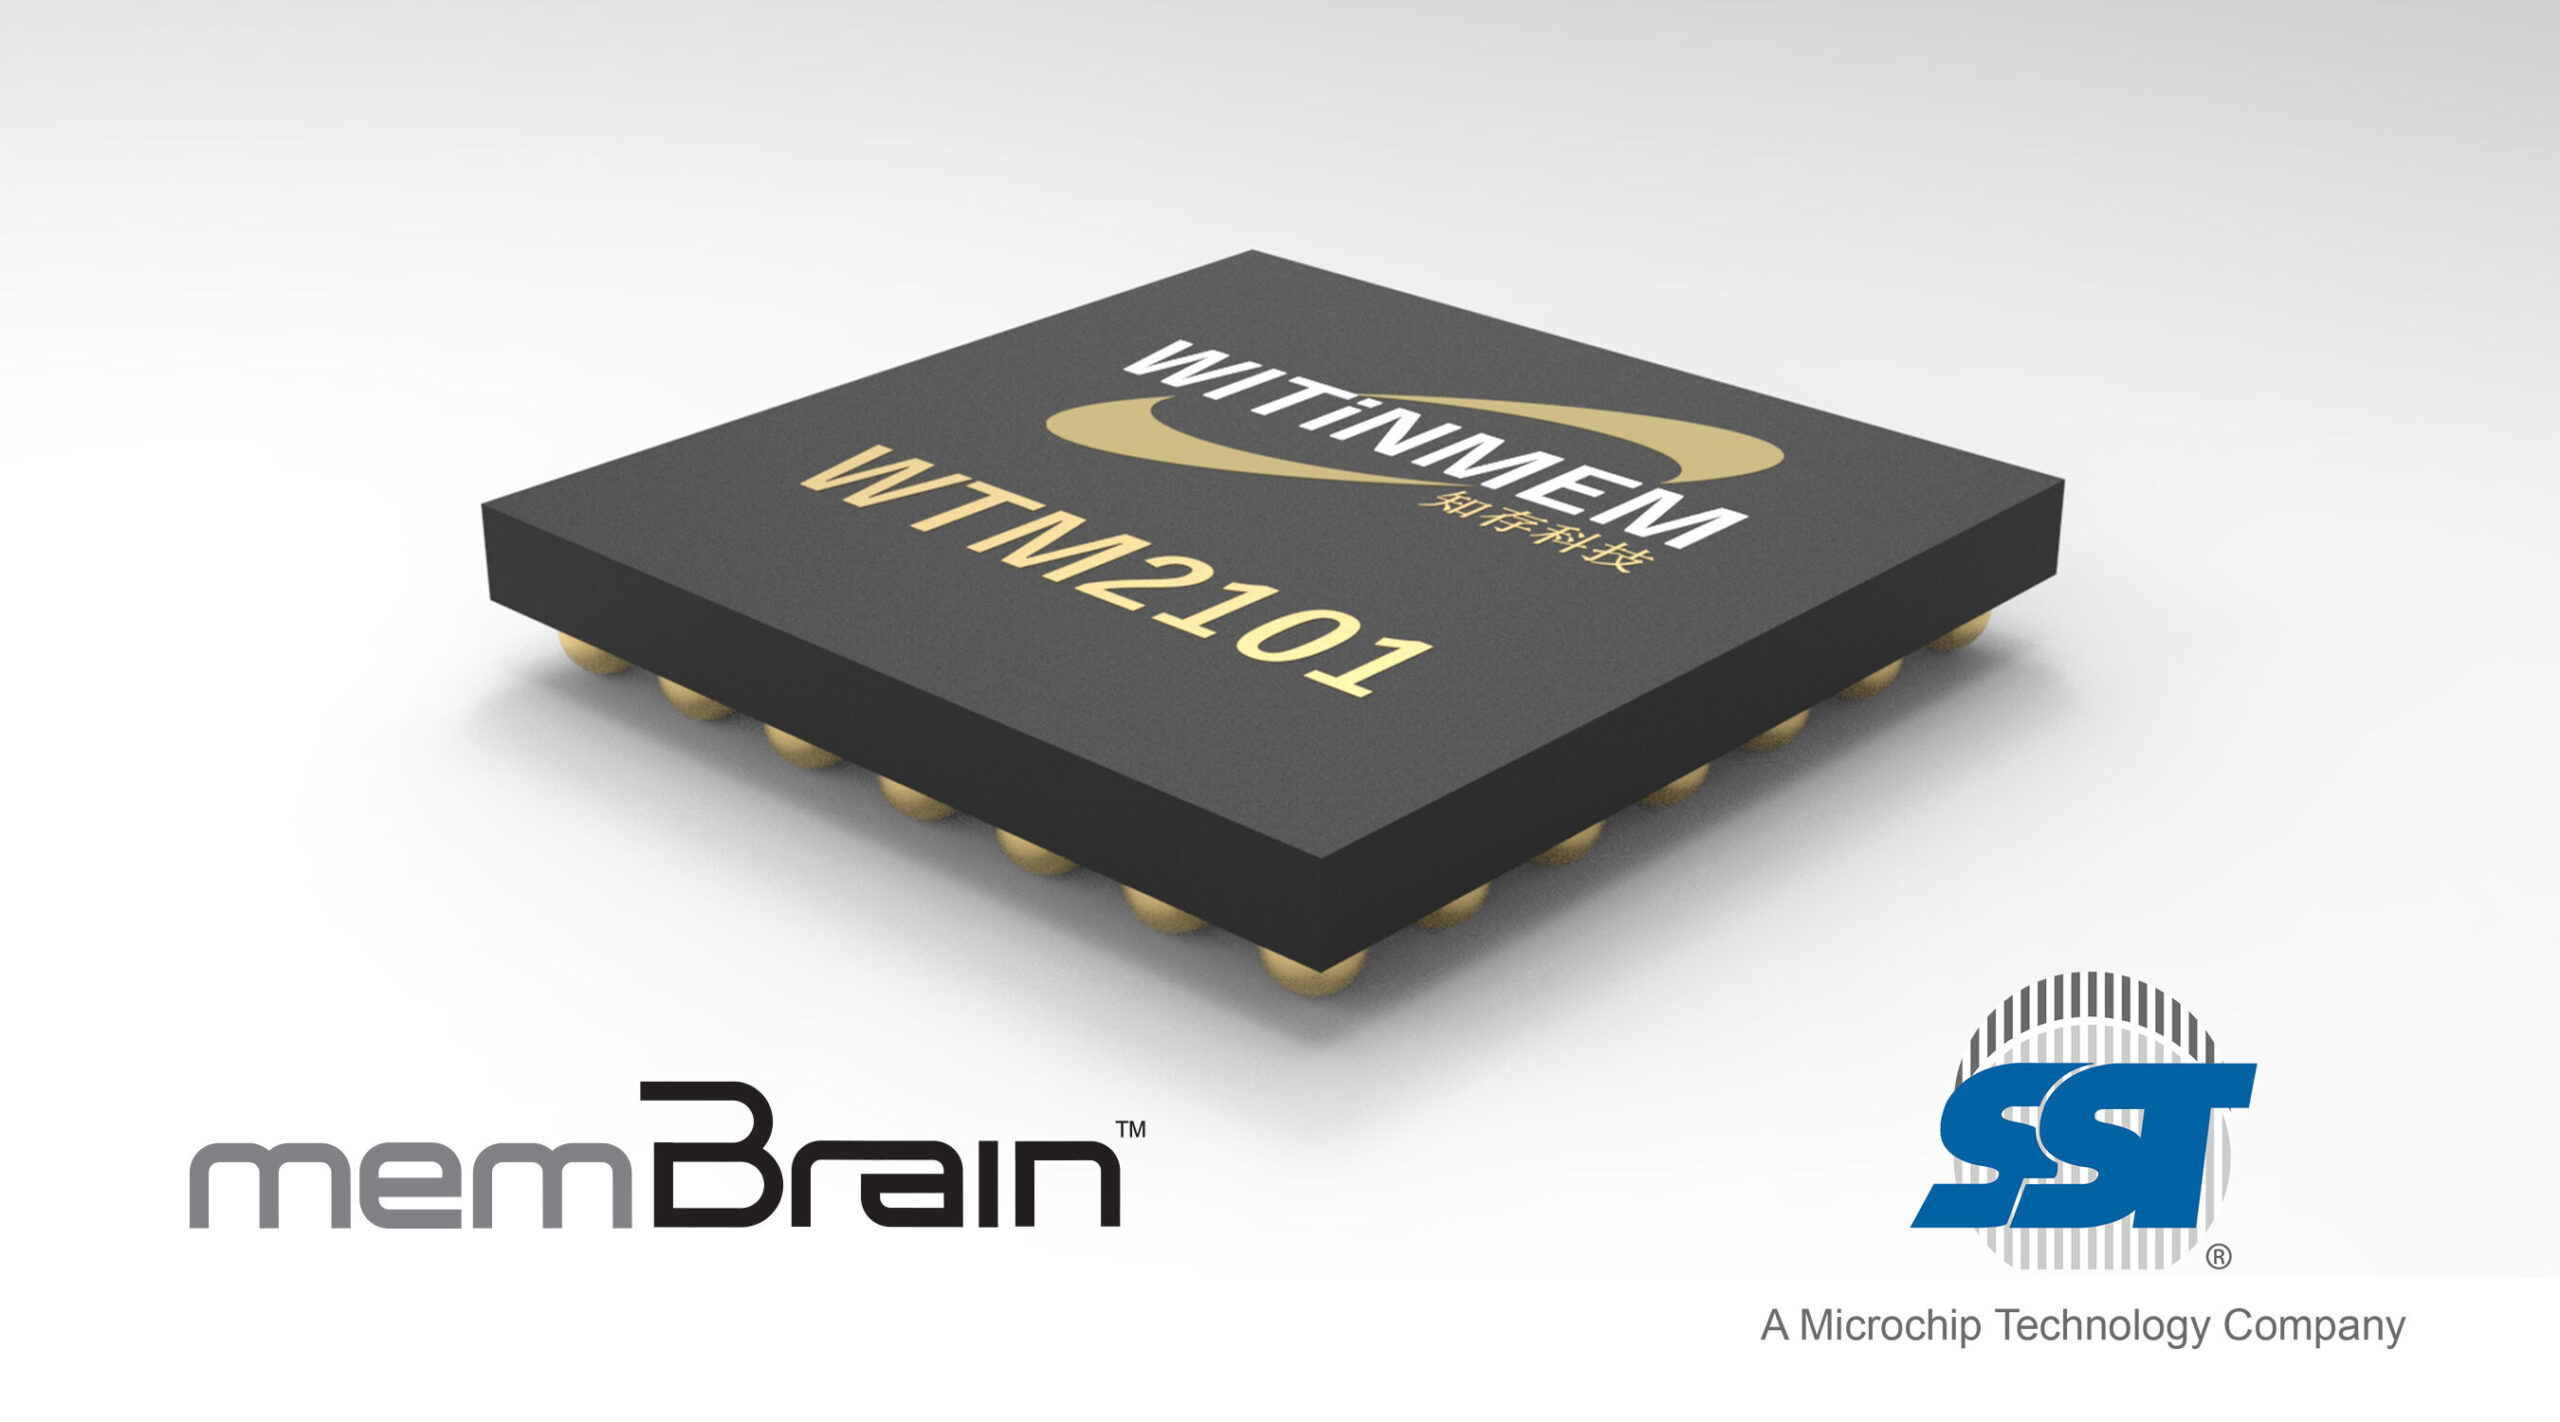 Computing-in-memory innovator solves speech processing challenges at the Edge using Microchip’s analog embedded SuperFlash technology